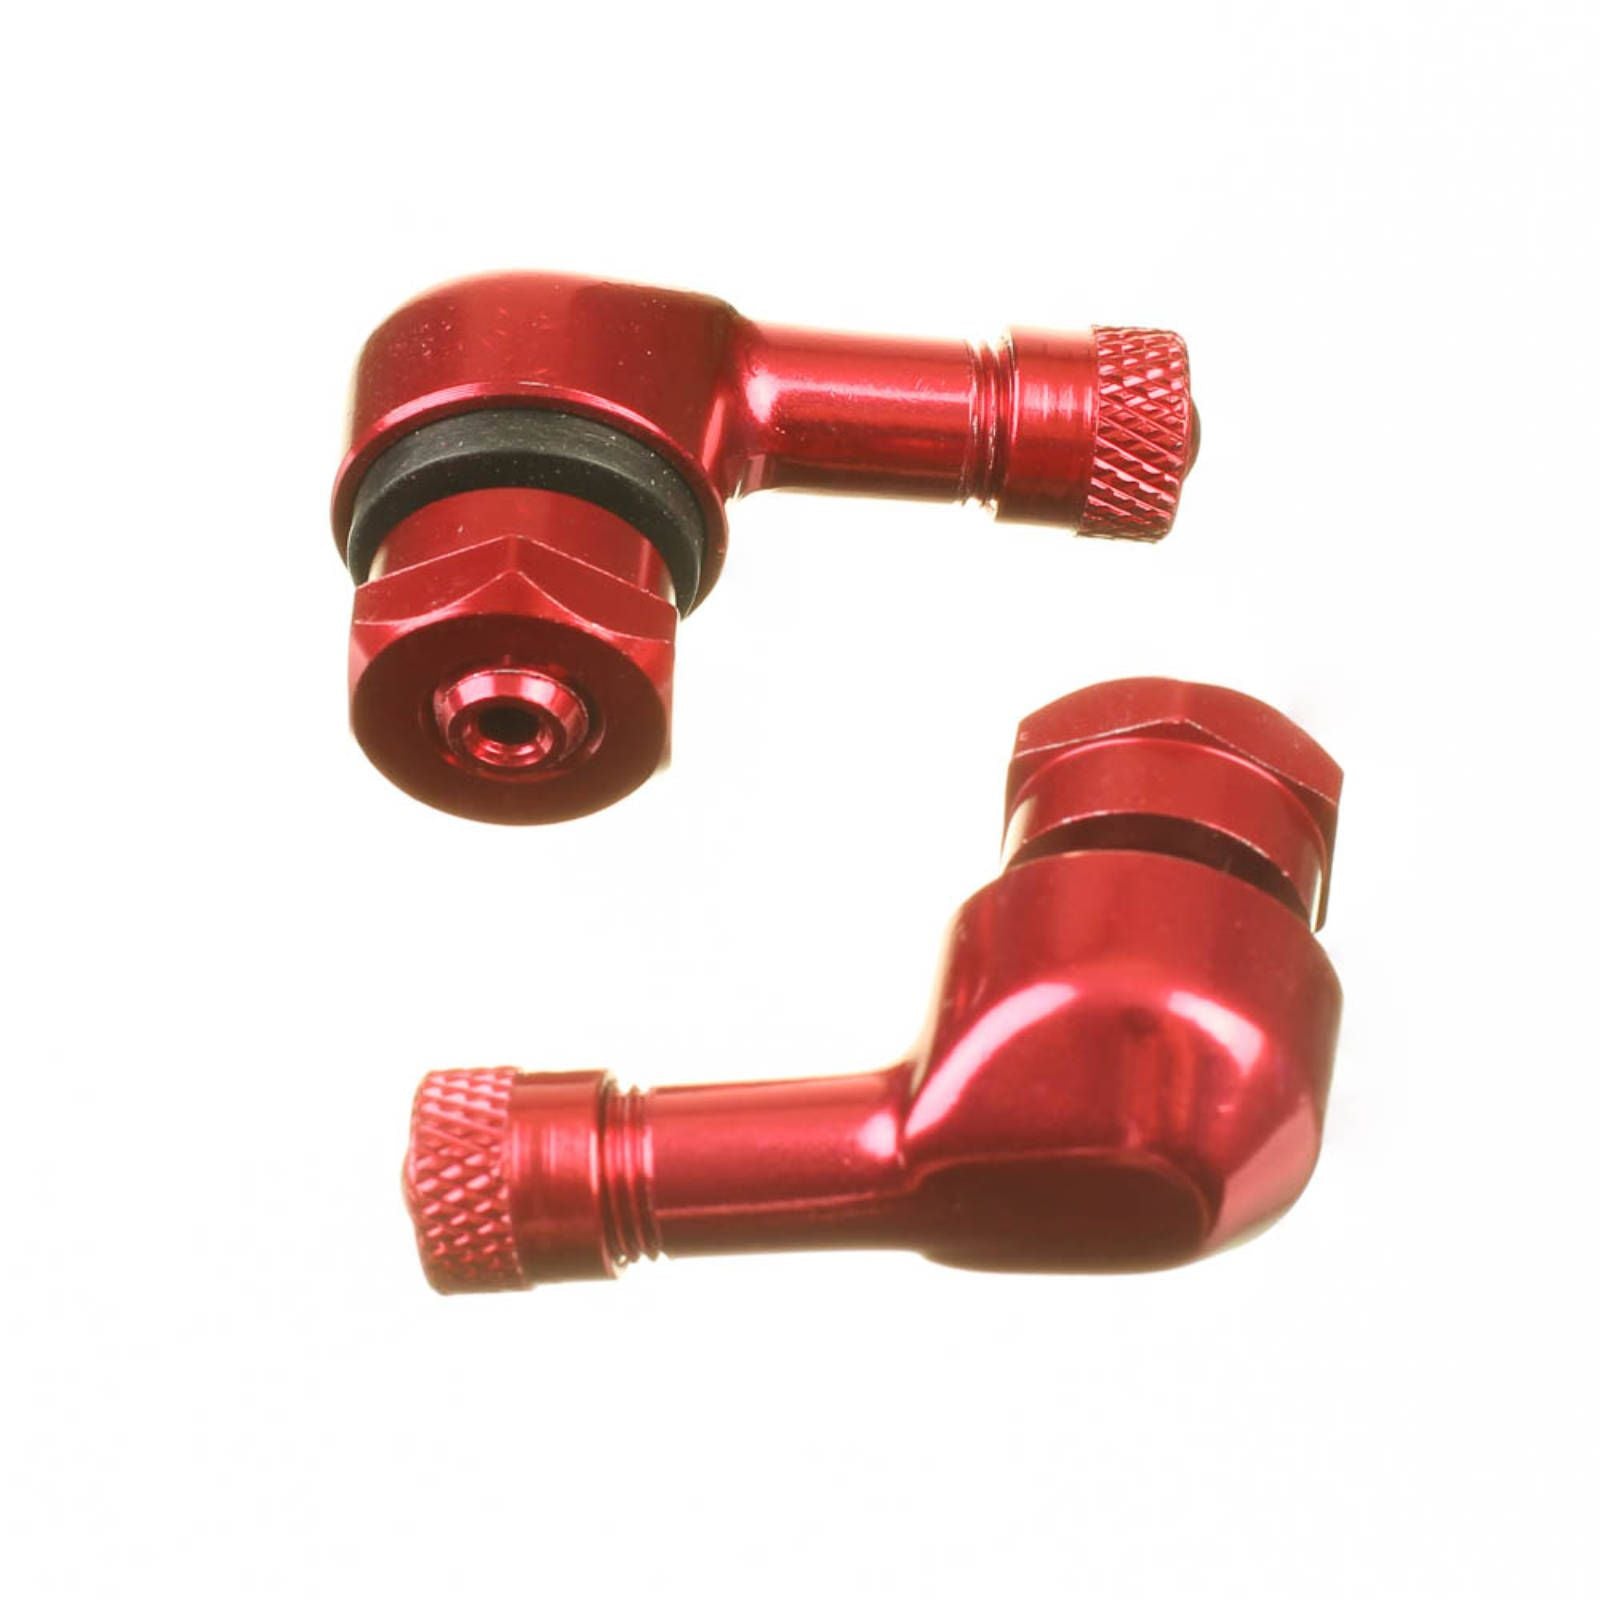 New WHITES Motorcycle 90 Degree Alloy Valve 8.3mm - Red (Pair) #WPV908R